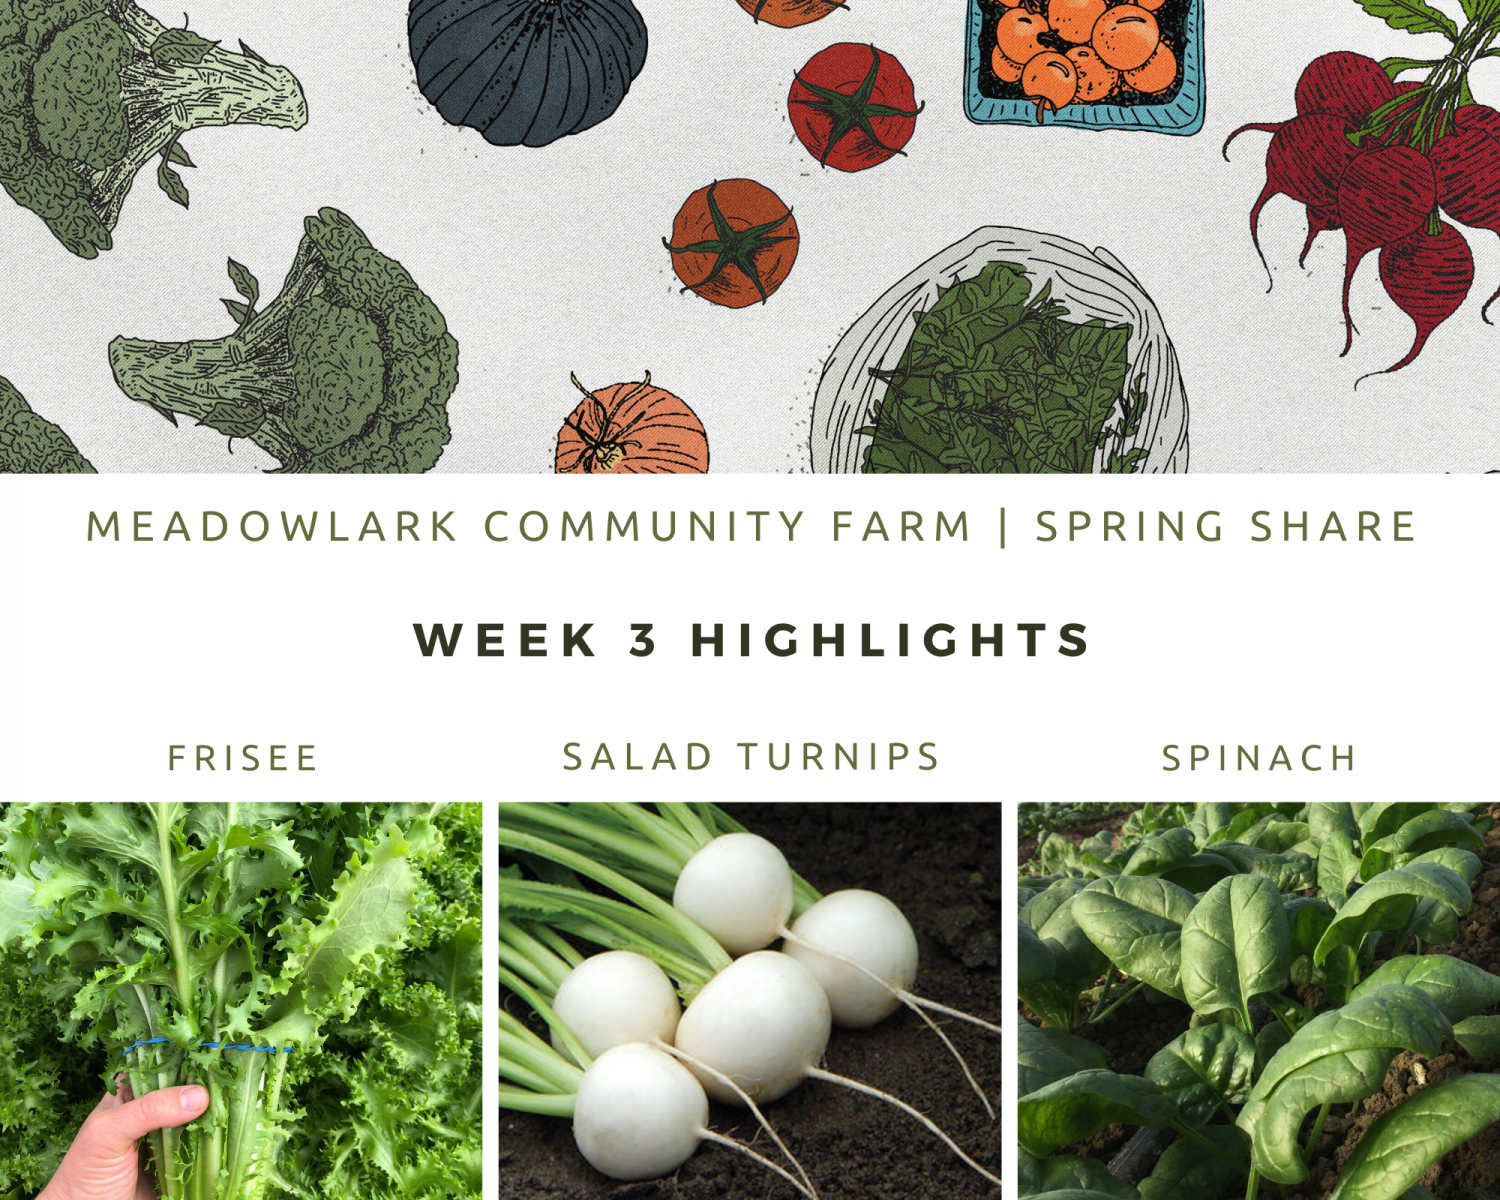 Previous Happening: Spring Share: Week 3